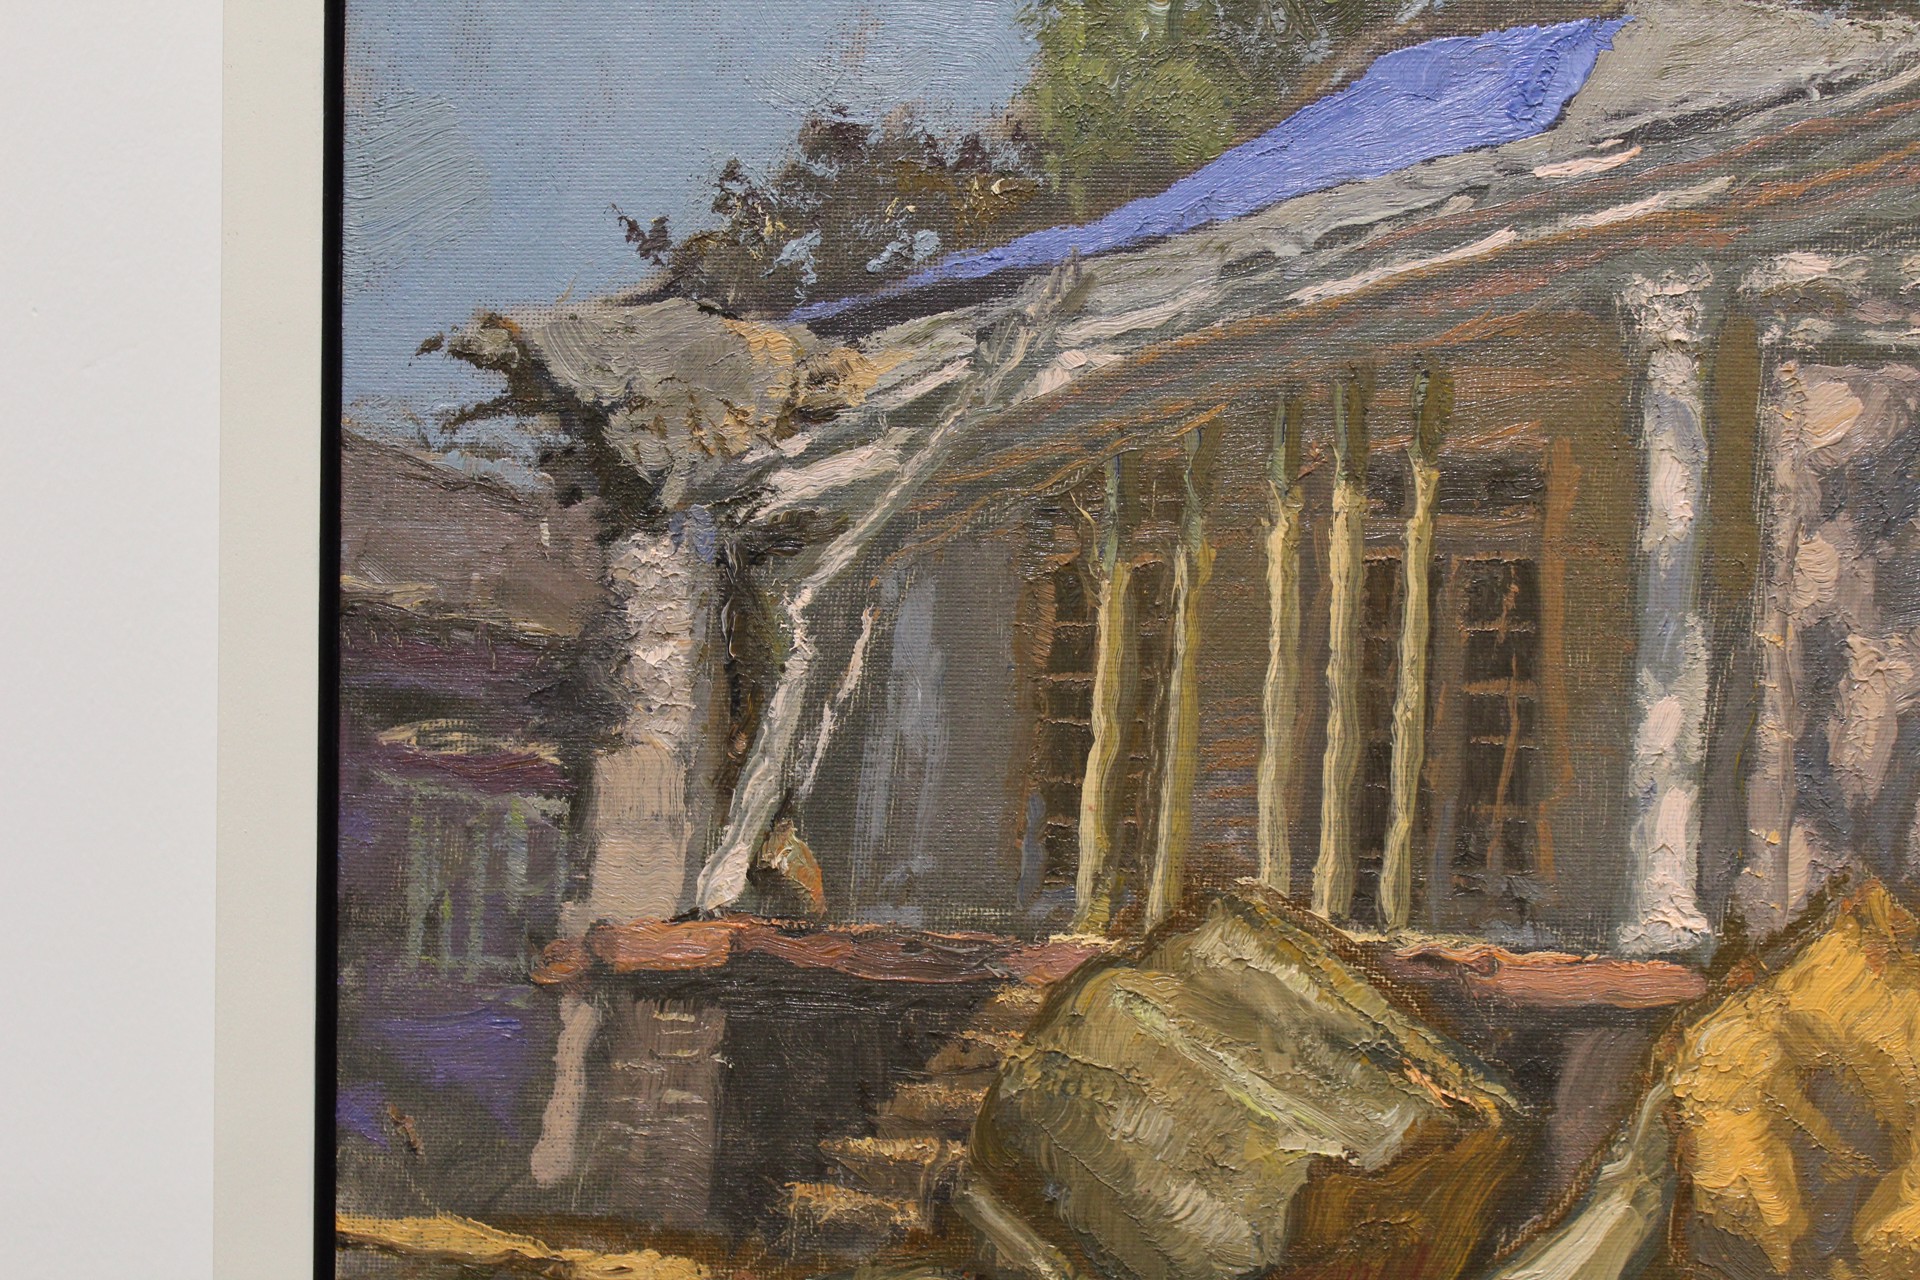 Cut Wood and Wrecked House by Phil Sandusky